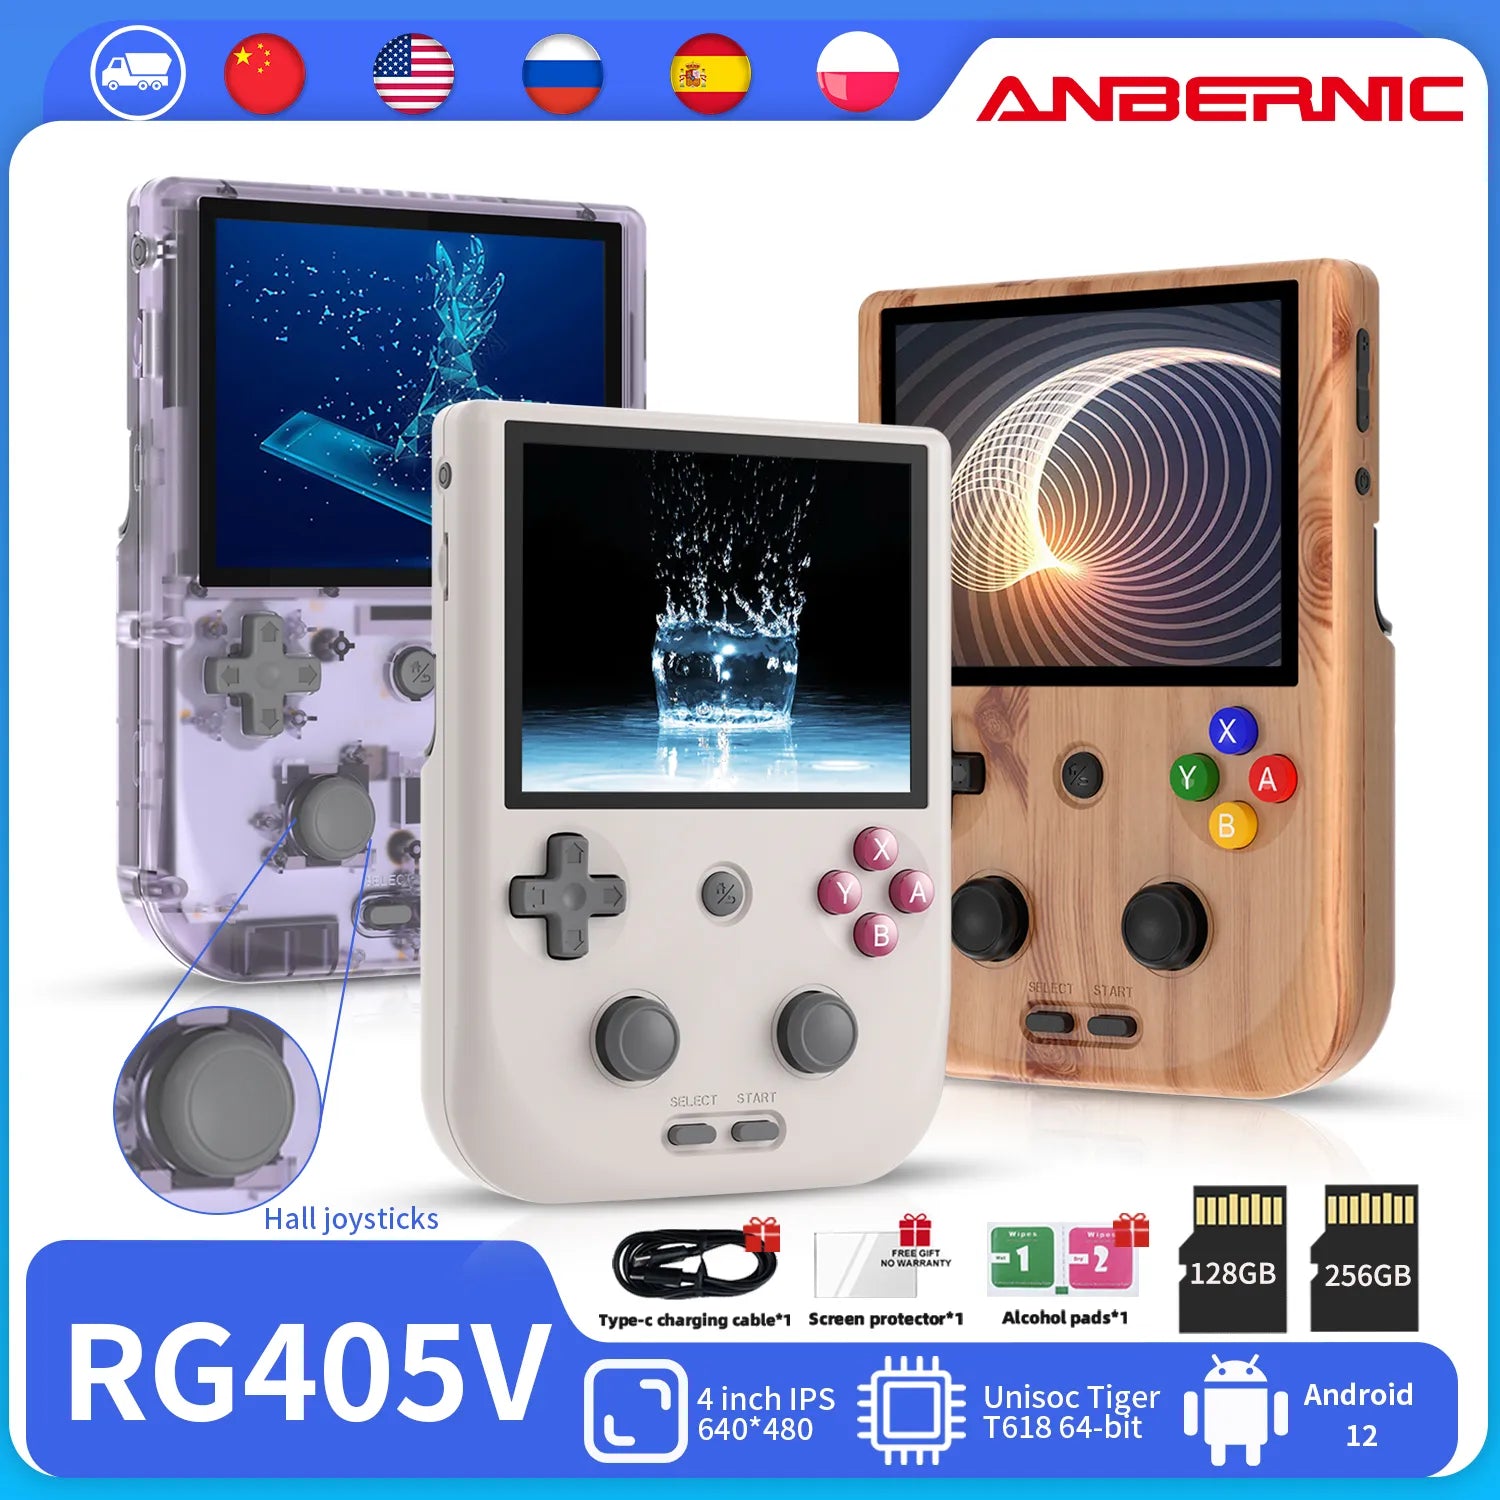 ANBERNIC RG405V Video Handheld Game Console 4" IPS HD Touch Screen Android 12 System T618 64-bit Wifi Portable Retro Game Player